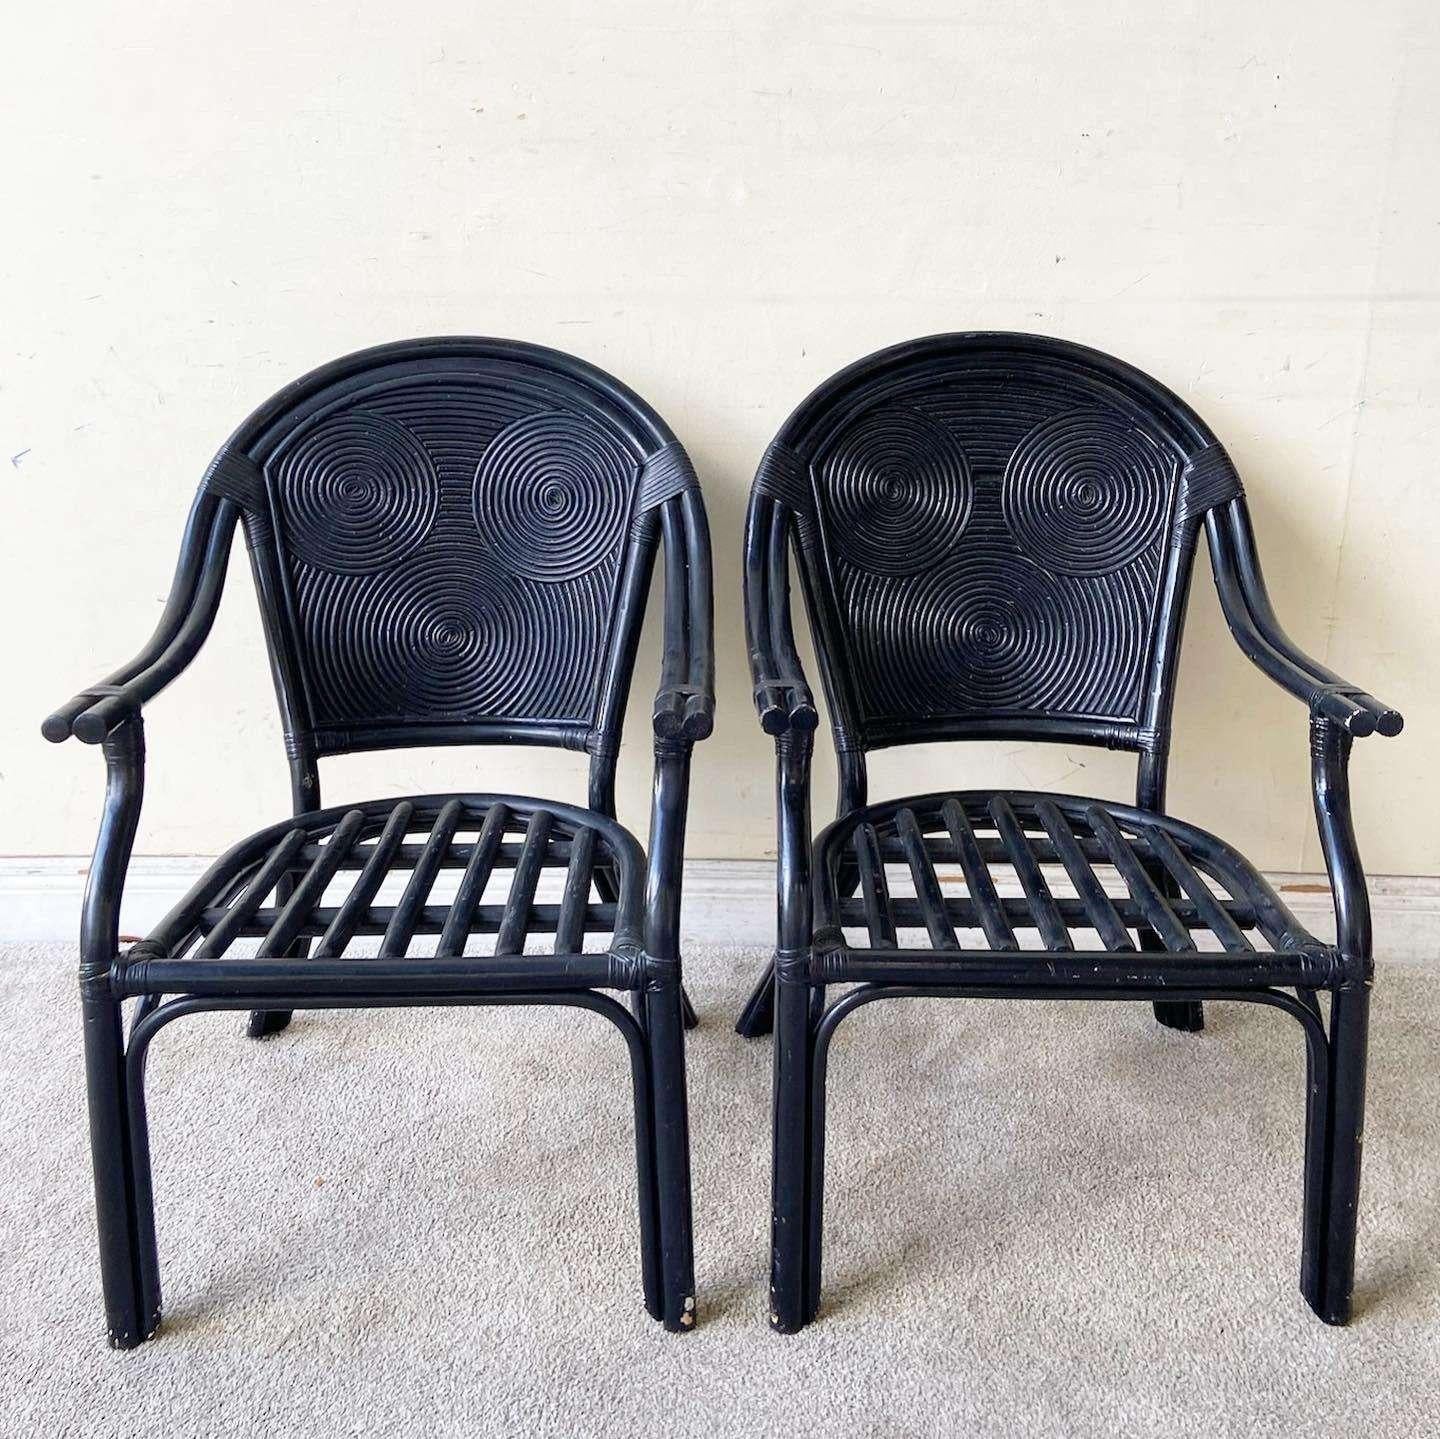 Late 20th Century Boho Chic Black Pencil Reed Arm Chairs - a Pair